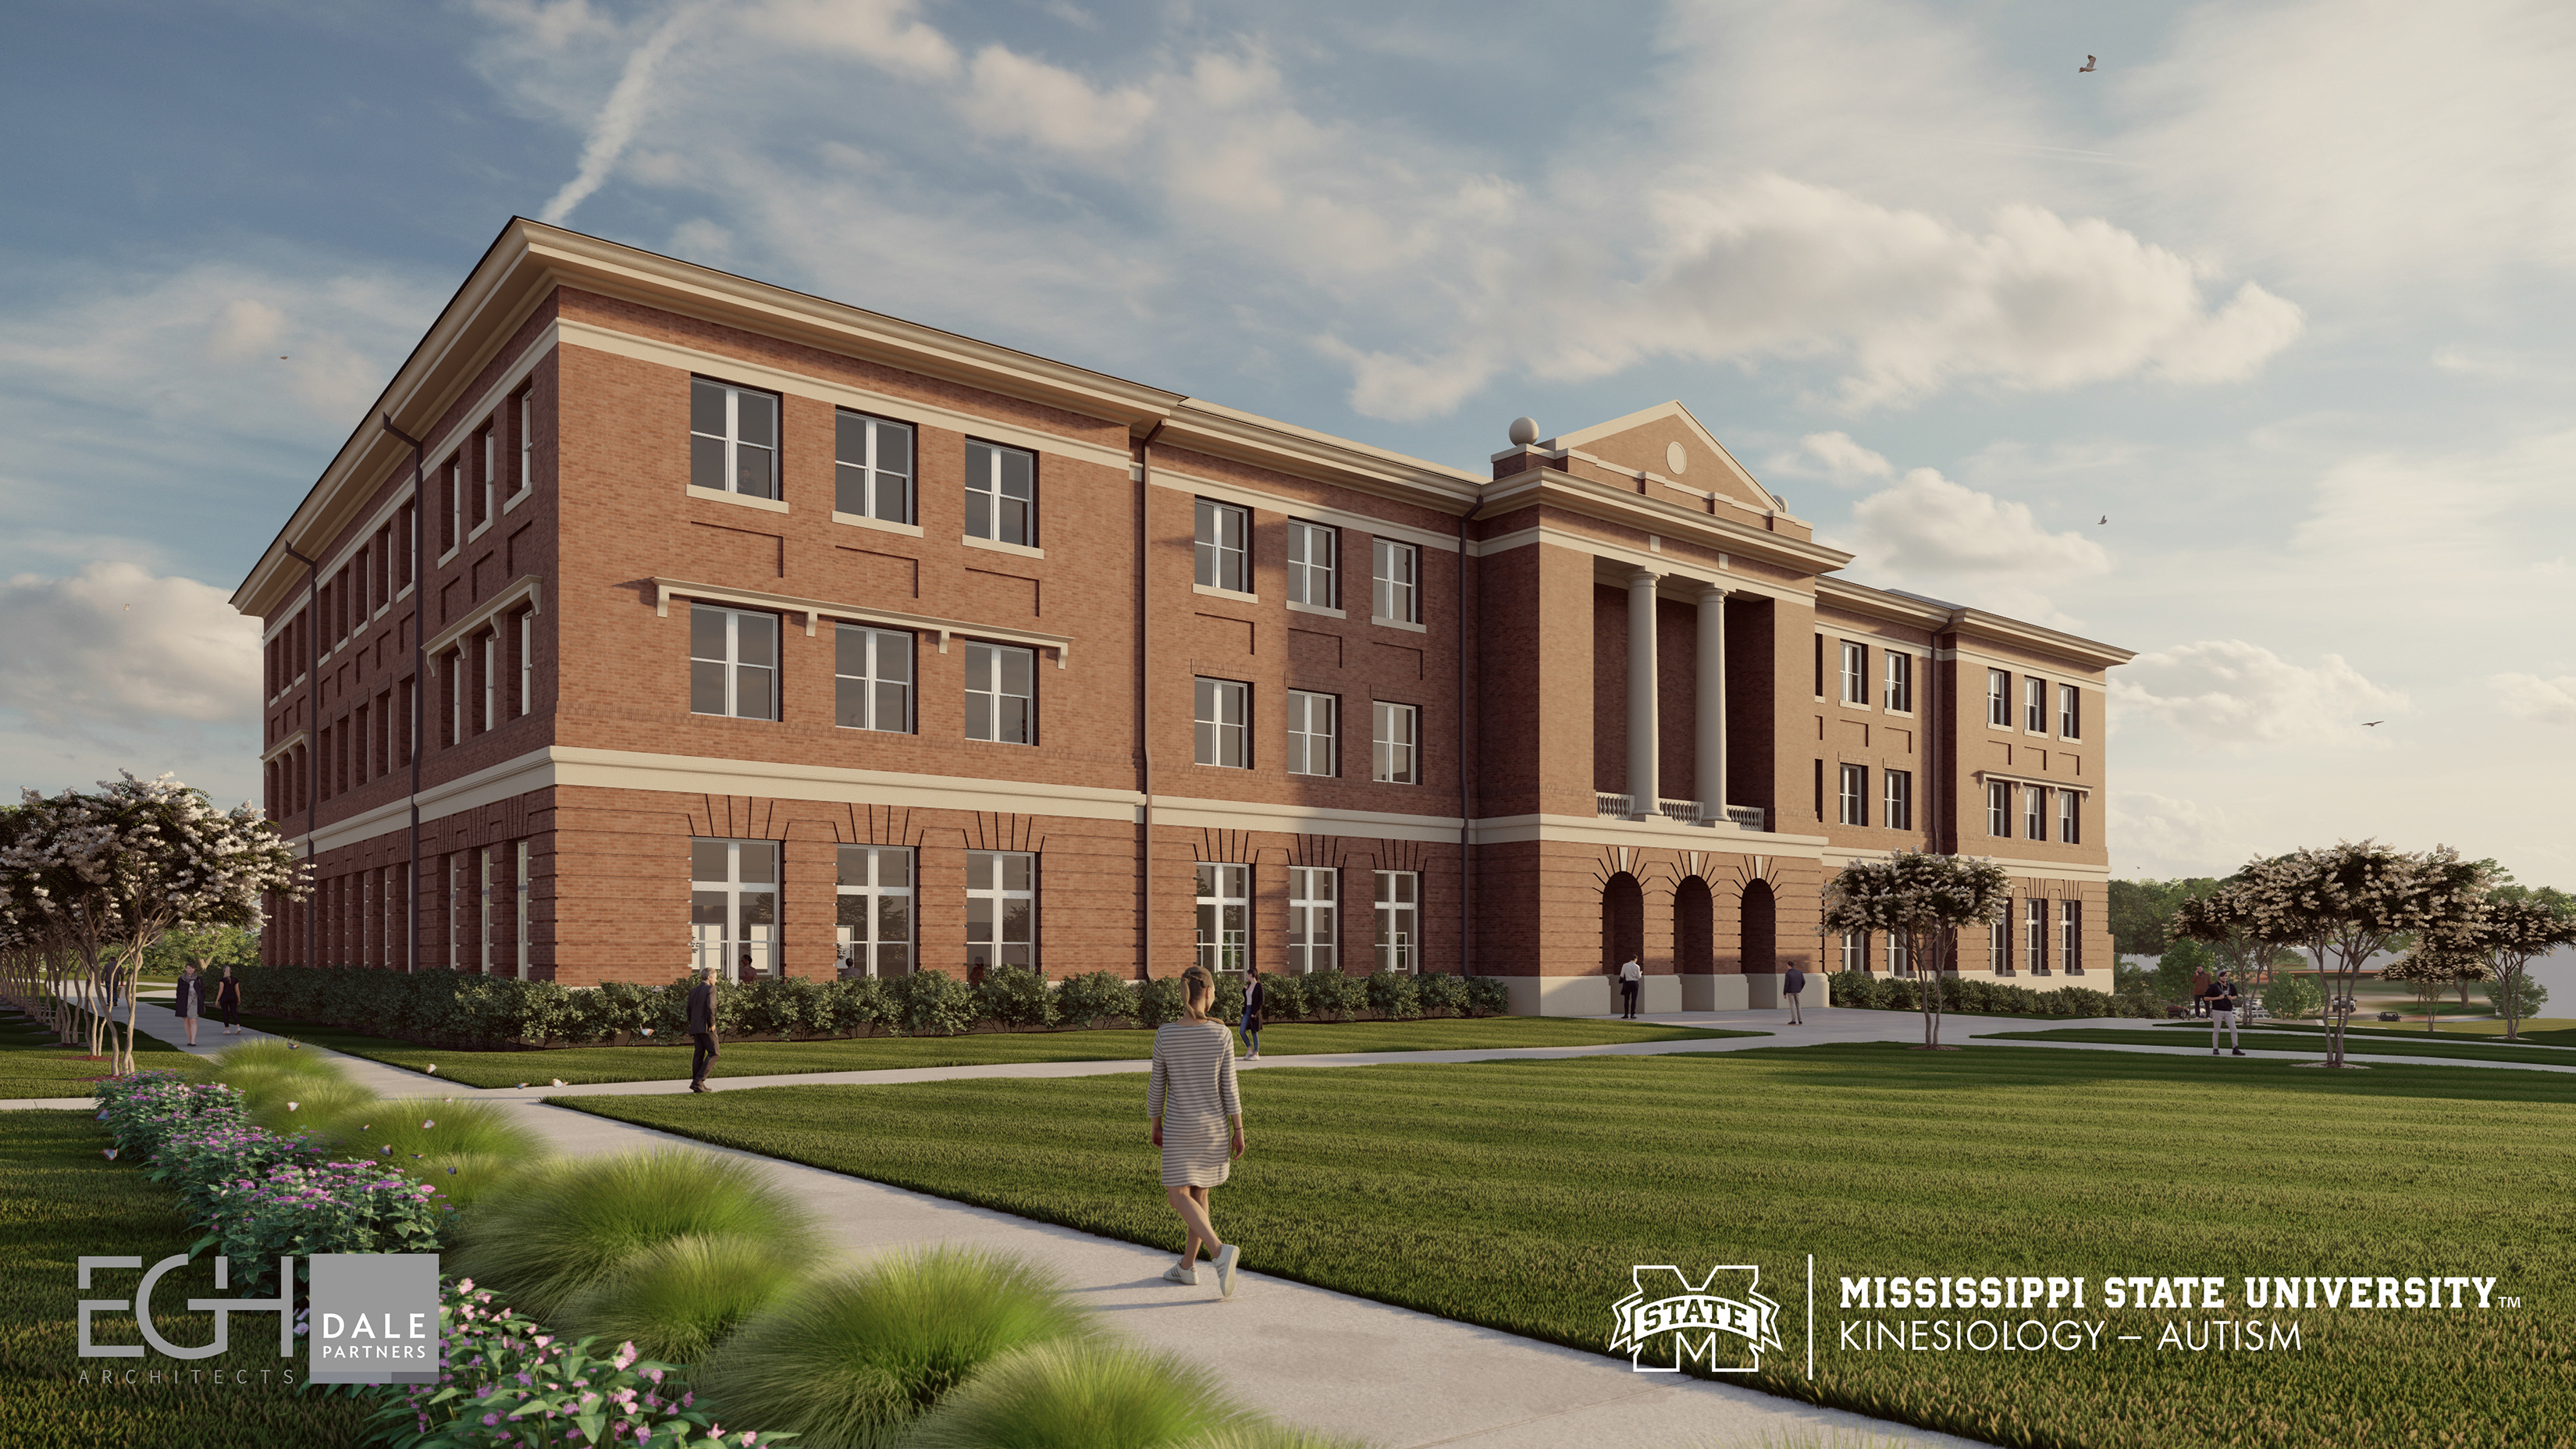 Mississippi State University’s new 100,000-square-foot Jim and Thomas Duff Center will serve as a vital resource for Mississippi children and families, providing a comprehensive learning environment and hands-on training ground not only for students, but practitioners as well.